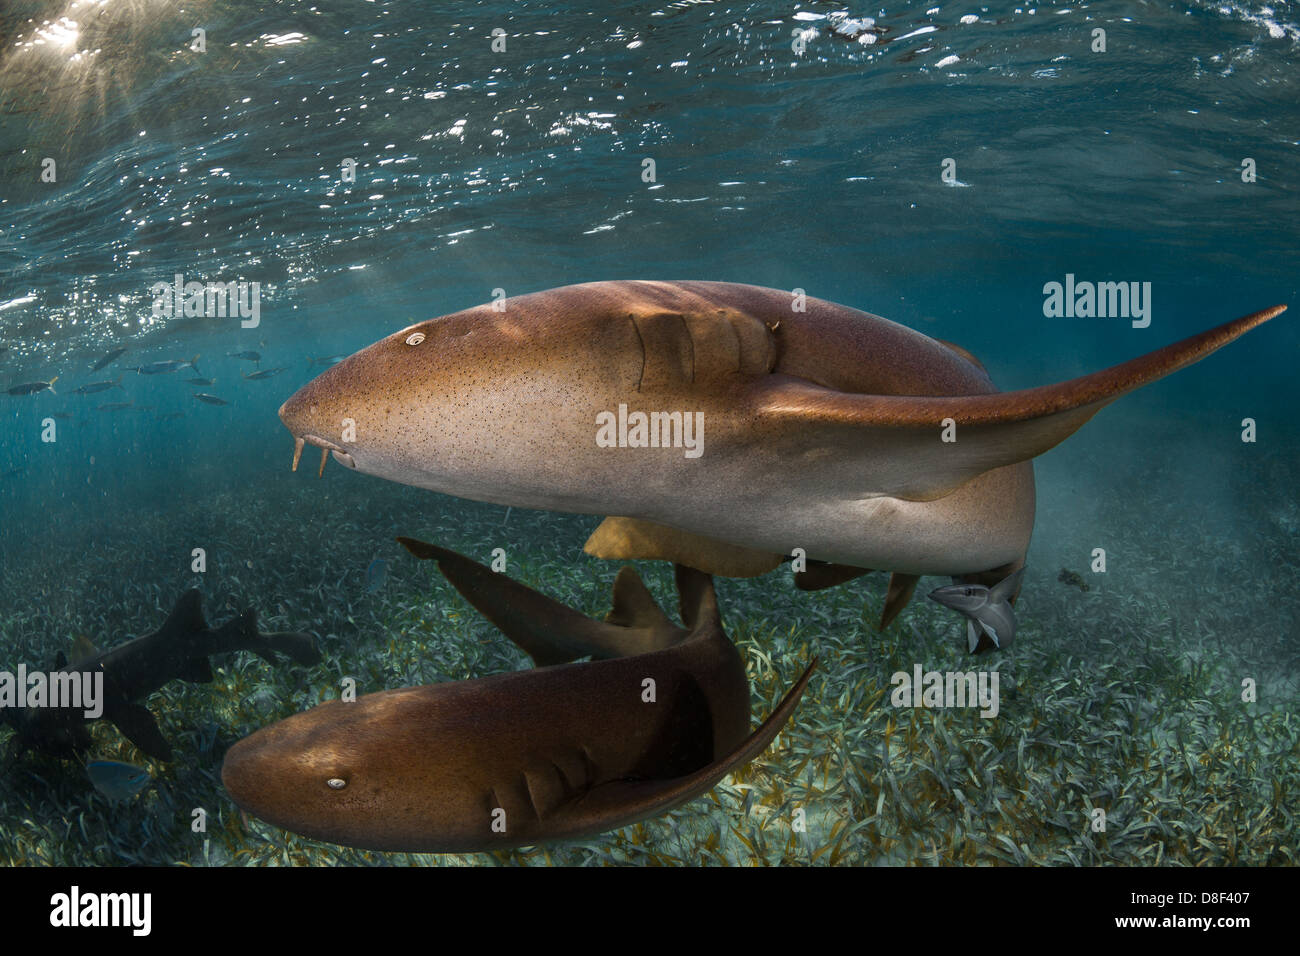 Friendly nurse sharks at the famous shark ray alley in Belize. Stock Photo